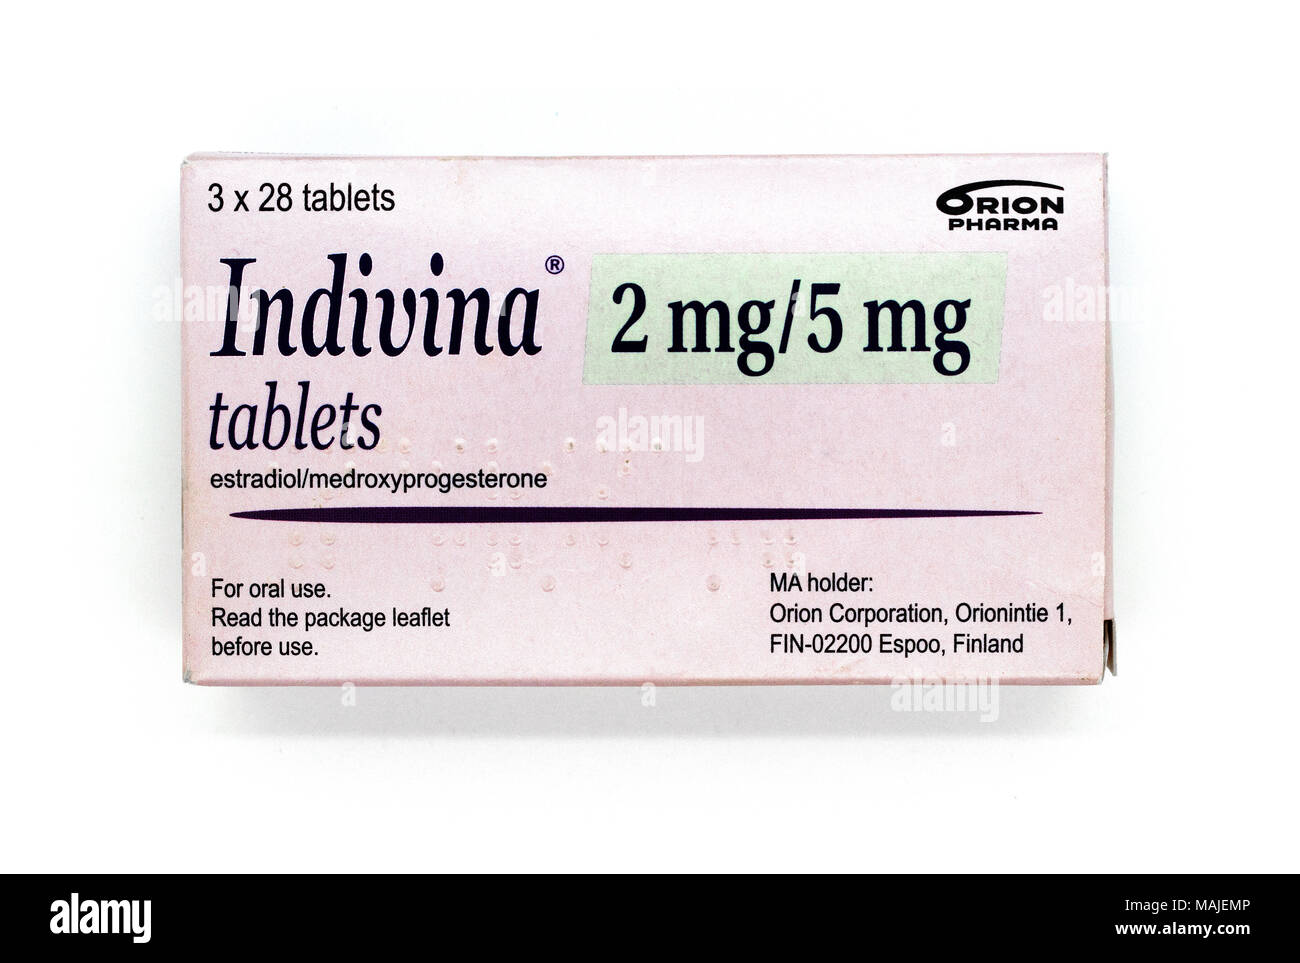 indivina hrt tablets Stock Photo